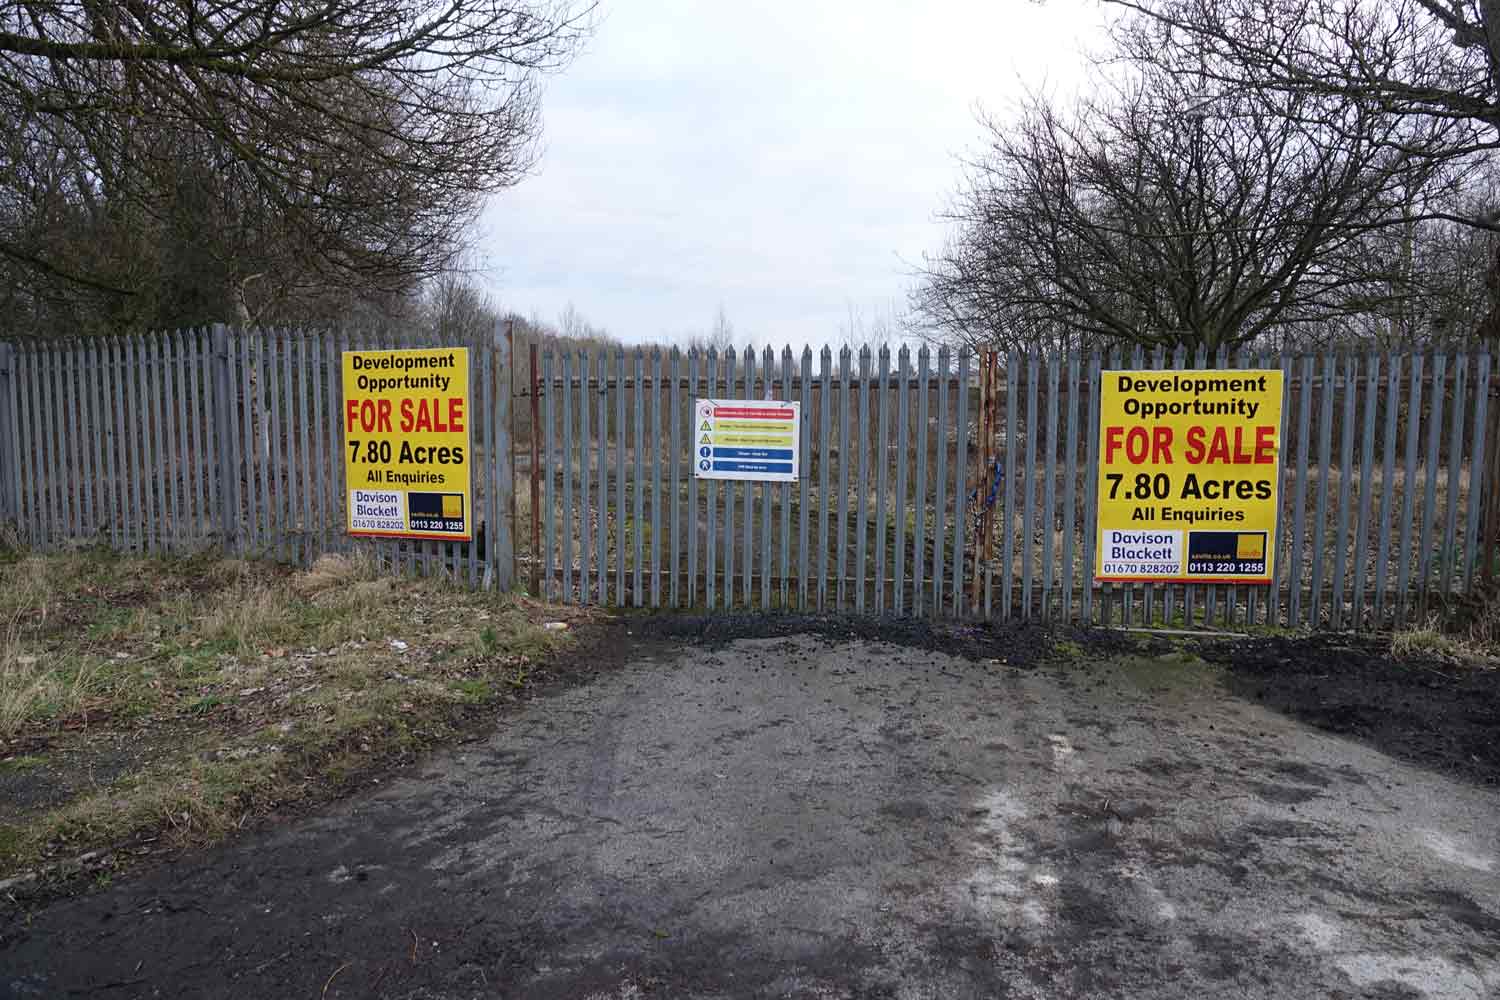 The entrance to the 7.8 acre site on Skipton Road in Harrogate